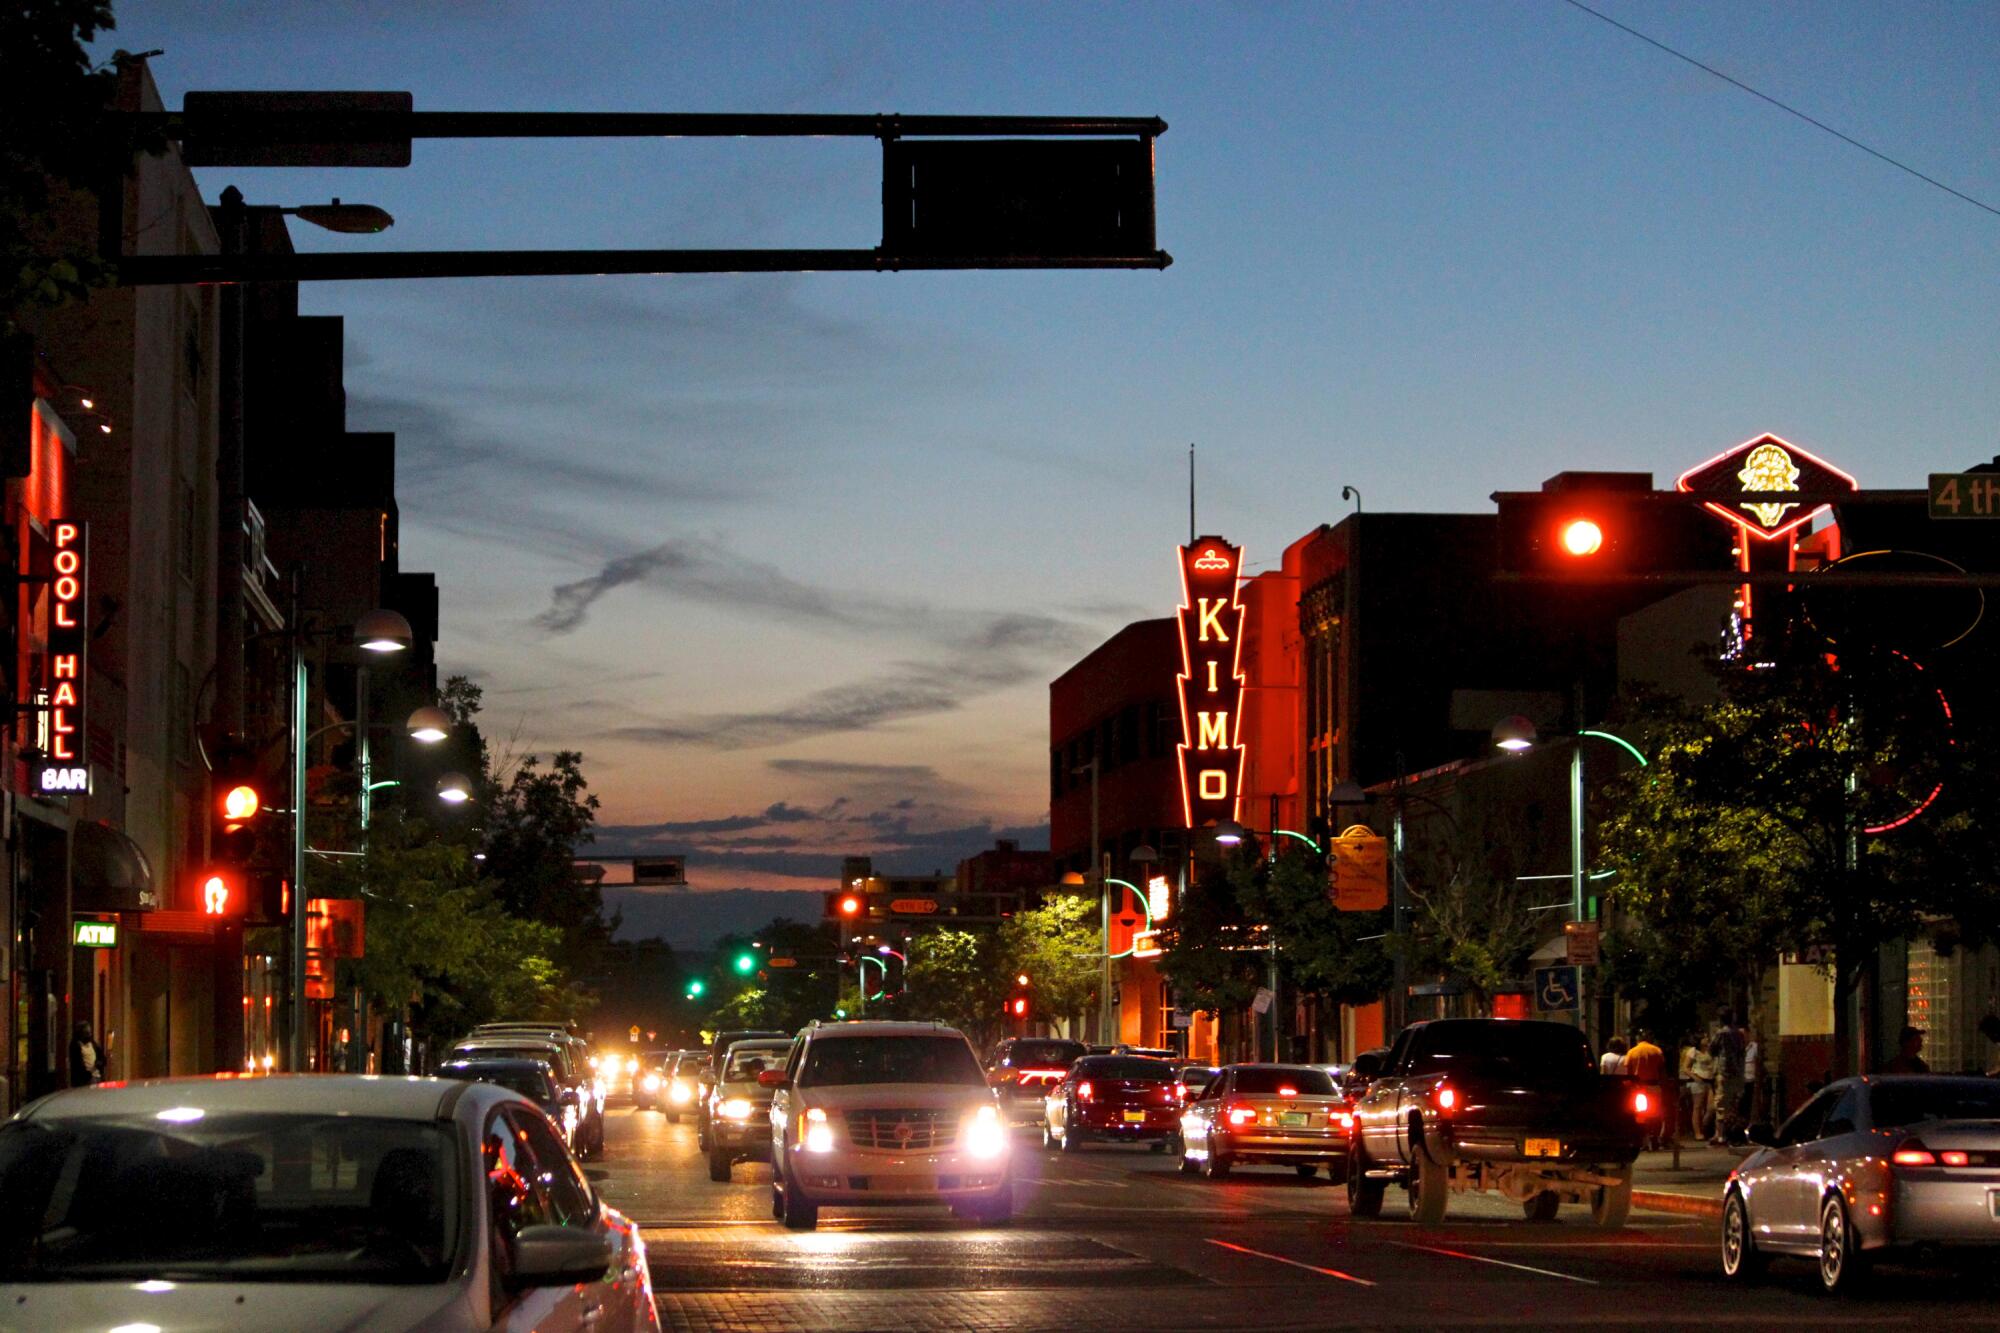 Cars drive down a city street lined with buildings and neon signs at twilight